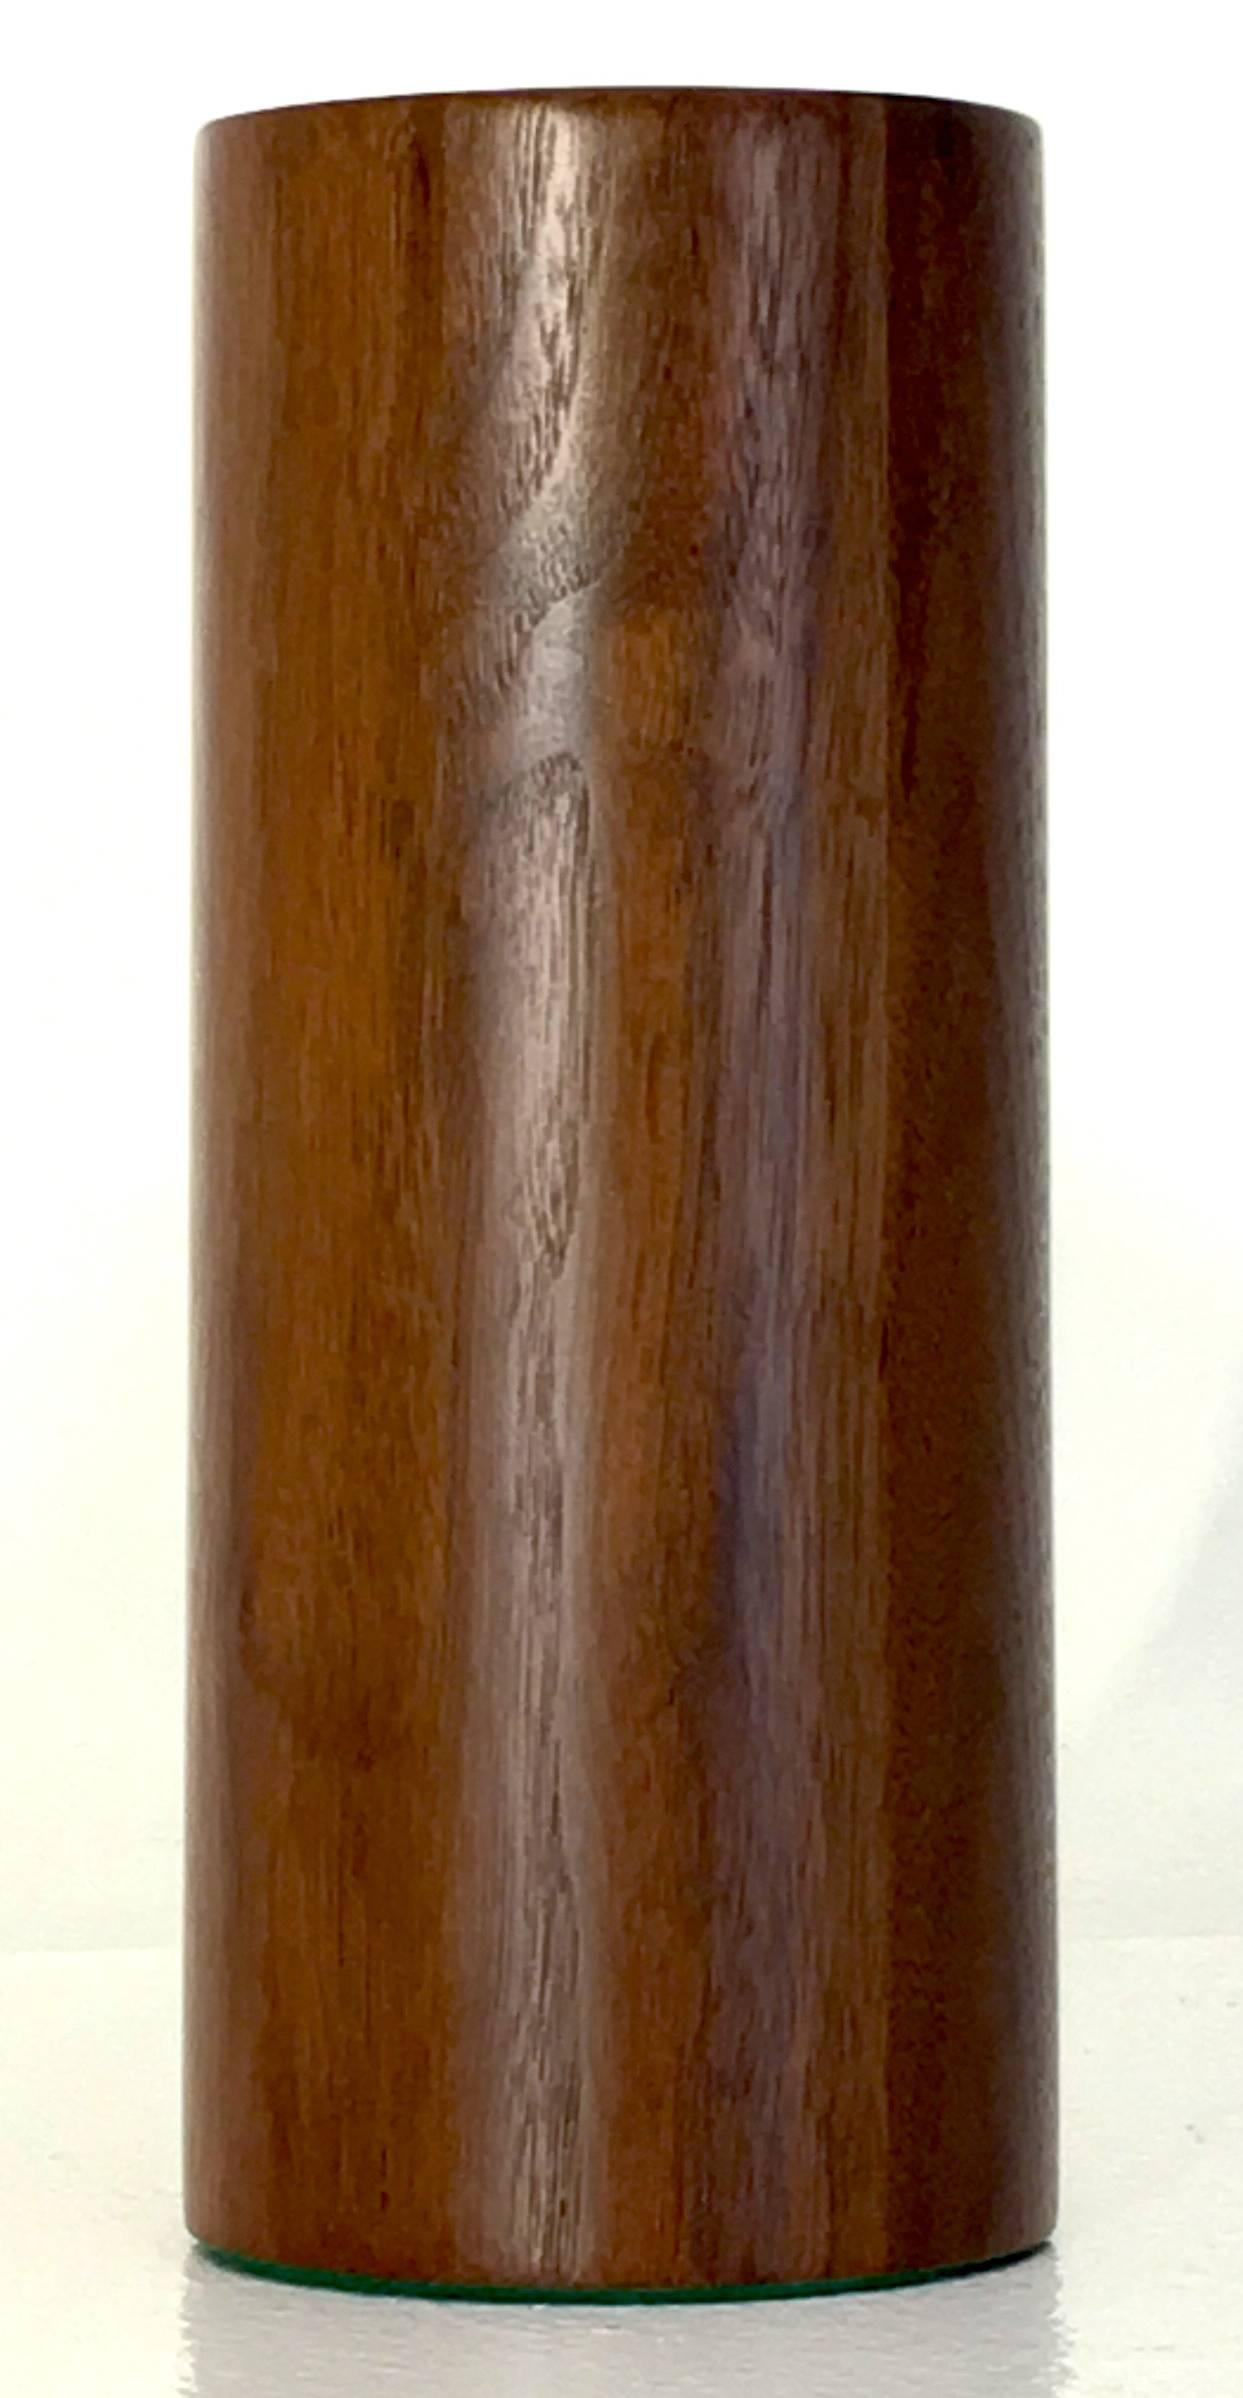 USA, circa 1970
Walnut
Measure: 9.5 tall x 4 inches wide. Subtle tapering to top where it measures 3.75